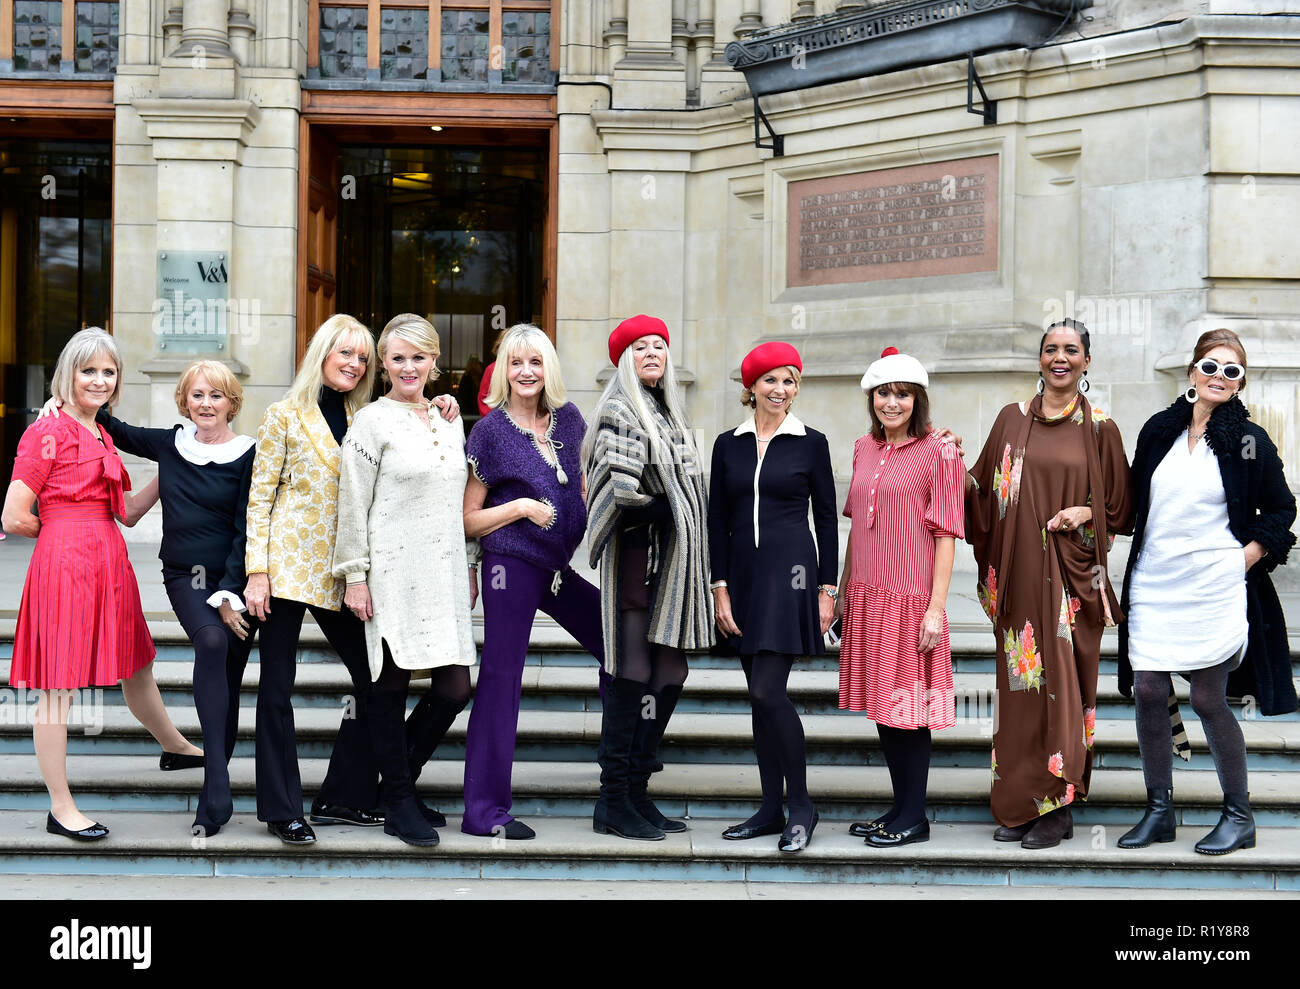 V&A, London, UK. 15 November, 2018. Models from the 1960s and 70s that worked with Mary Quant gather to form a Quant revival. The event marks the first time the public are able to purchase tickets for the Mary Quant exhibition opening in 6 April 2019. Models are (not in order): Jill Kennington, Kari Ann Muller, Pru Bury, Ulrika, Jacky Boase, Lorraine Naylor, Hazel, Clare Hunt, Sara Hollamby, Sally Kemp. Credit: Malcolm Park/Alamy Live News. Stock Photo